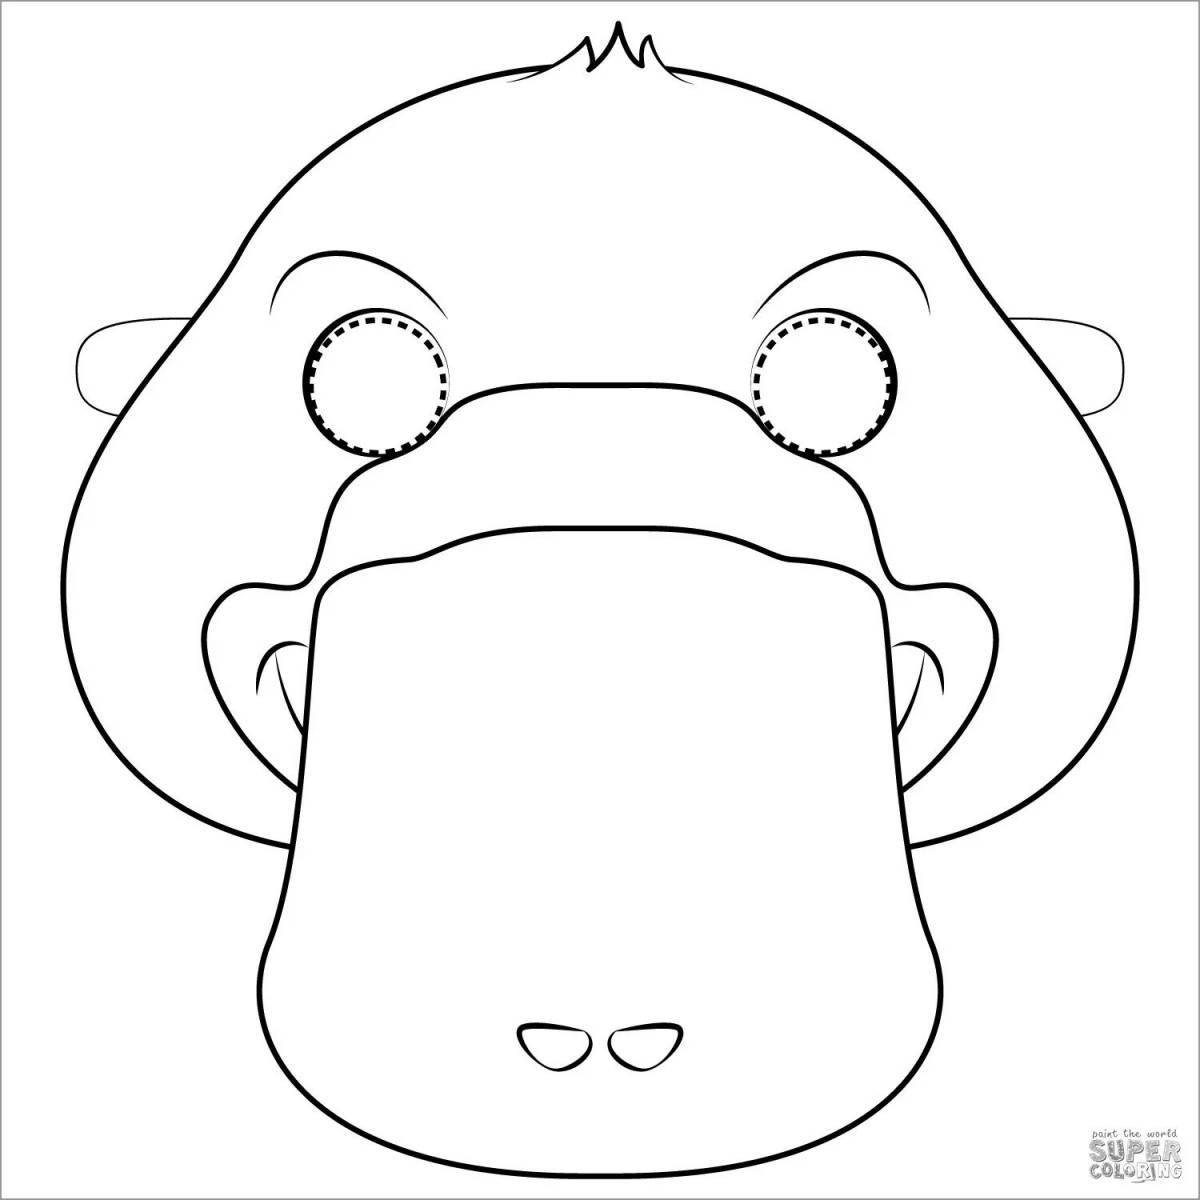 Artistic lizard mask coloring page